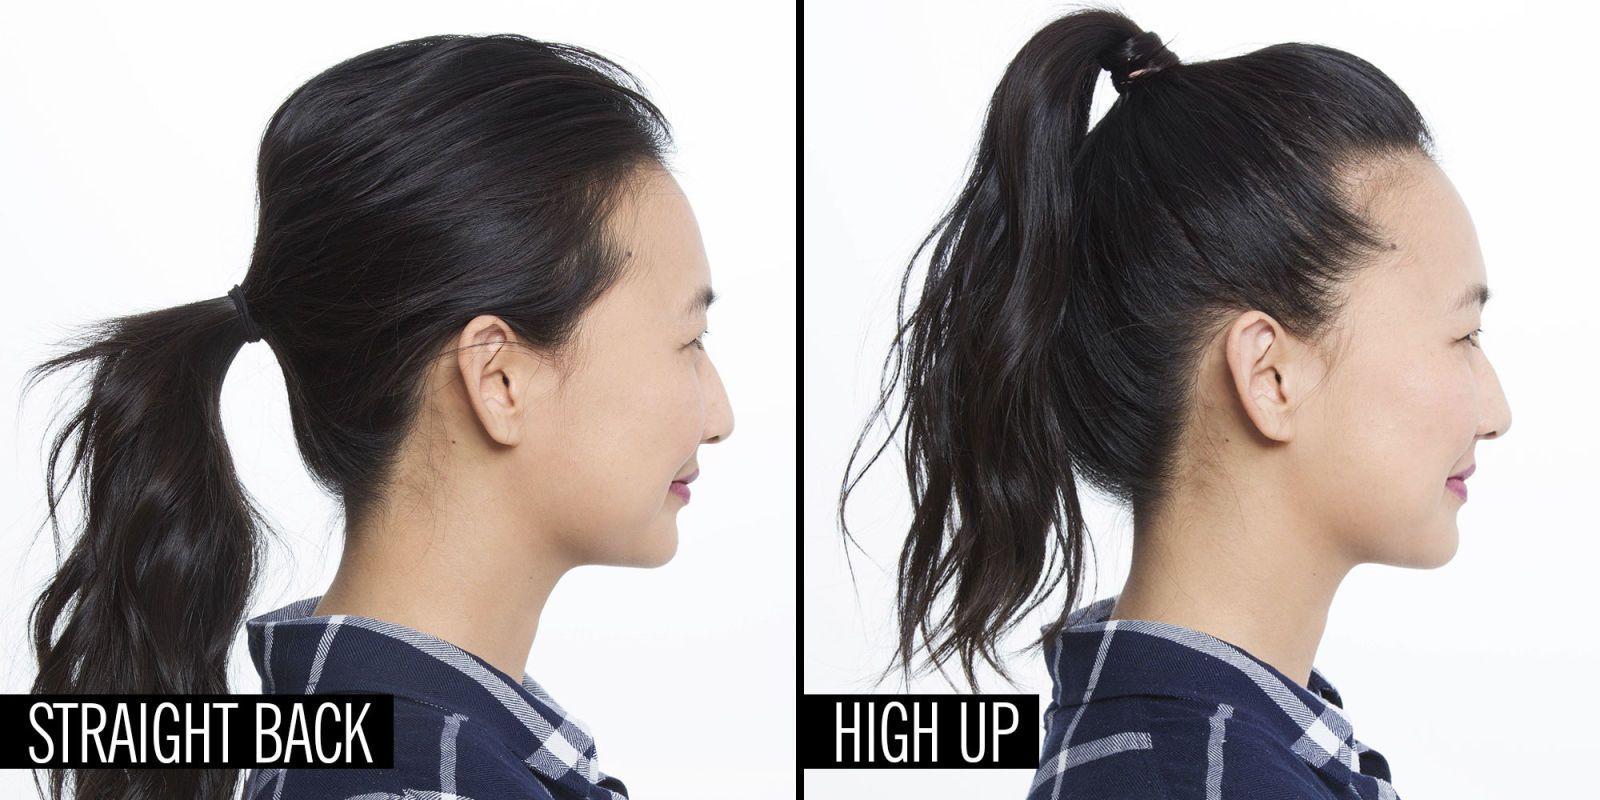 What's the best hairstyle for a girl with a long forehead? - Quora